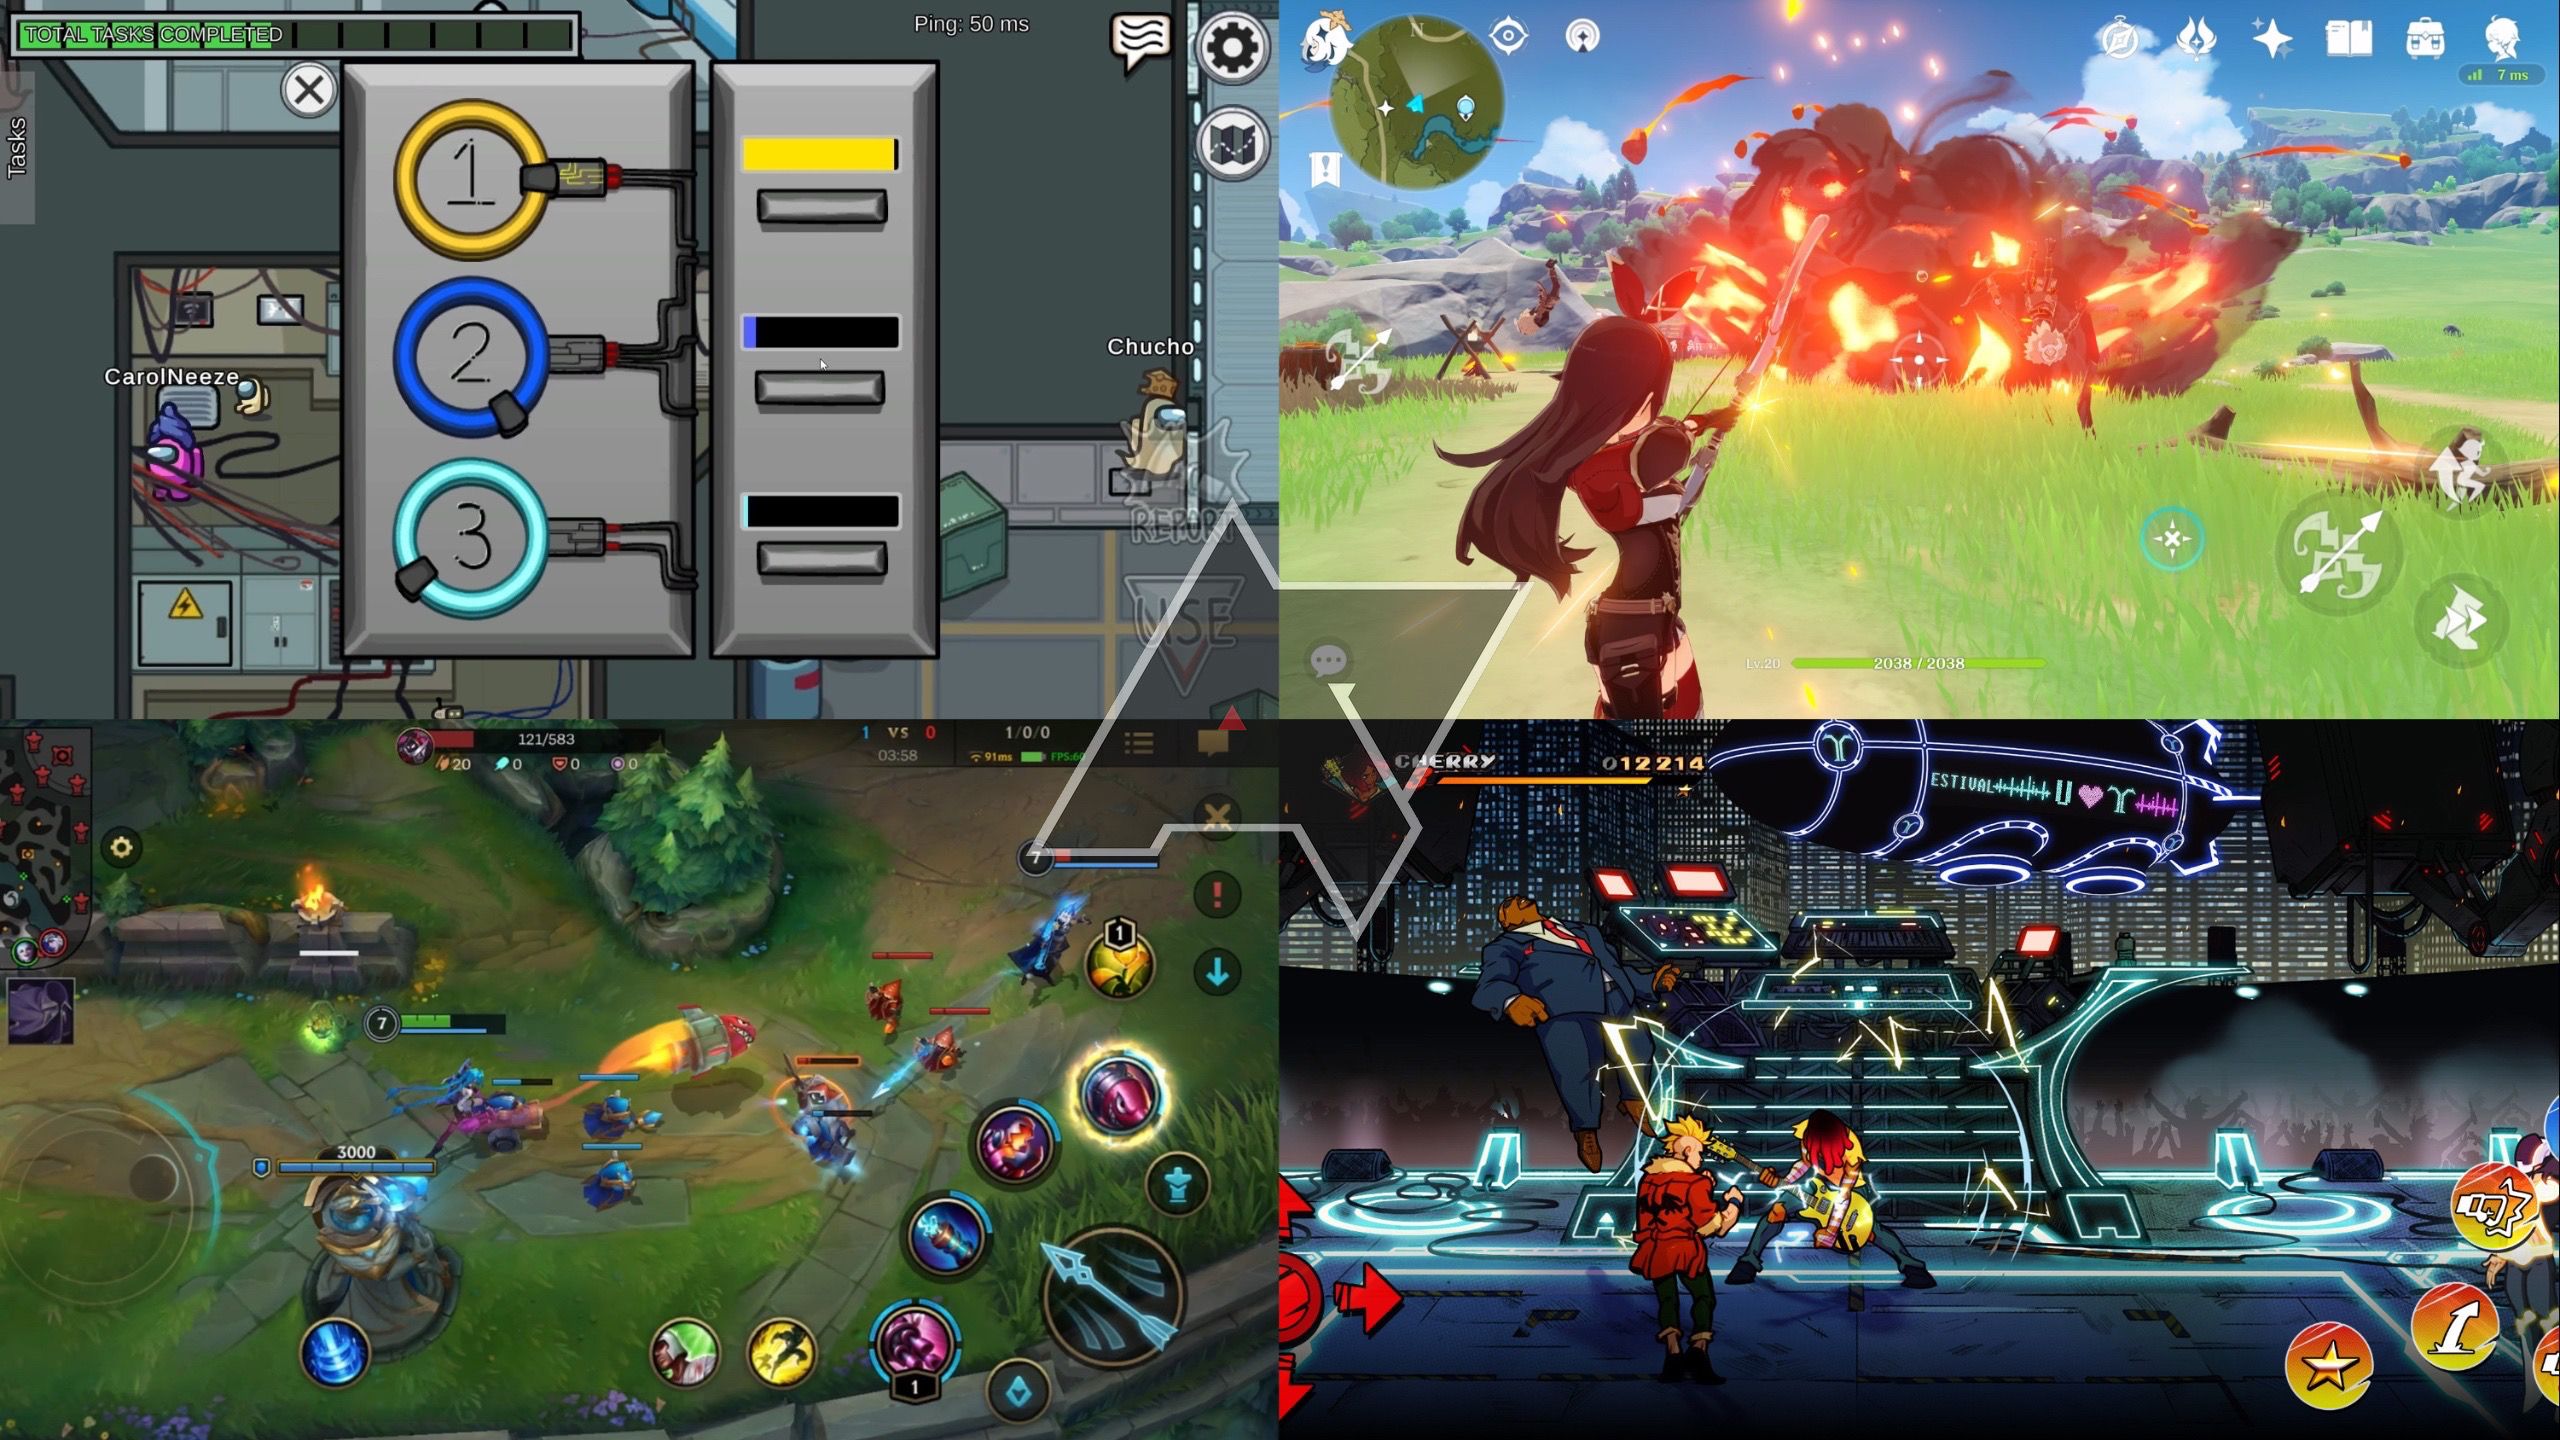 The best 25 free mobile games to play on your iPhone, iPad or Android phone